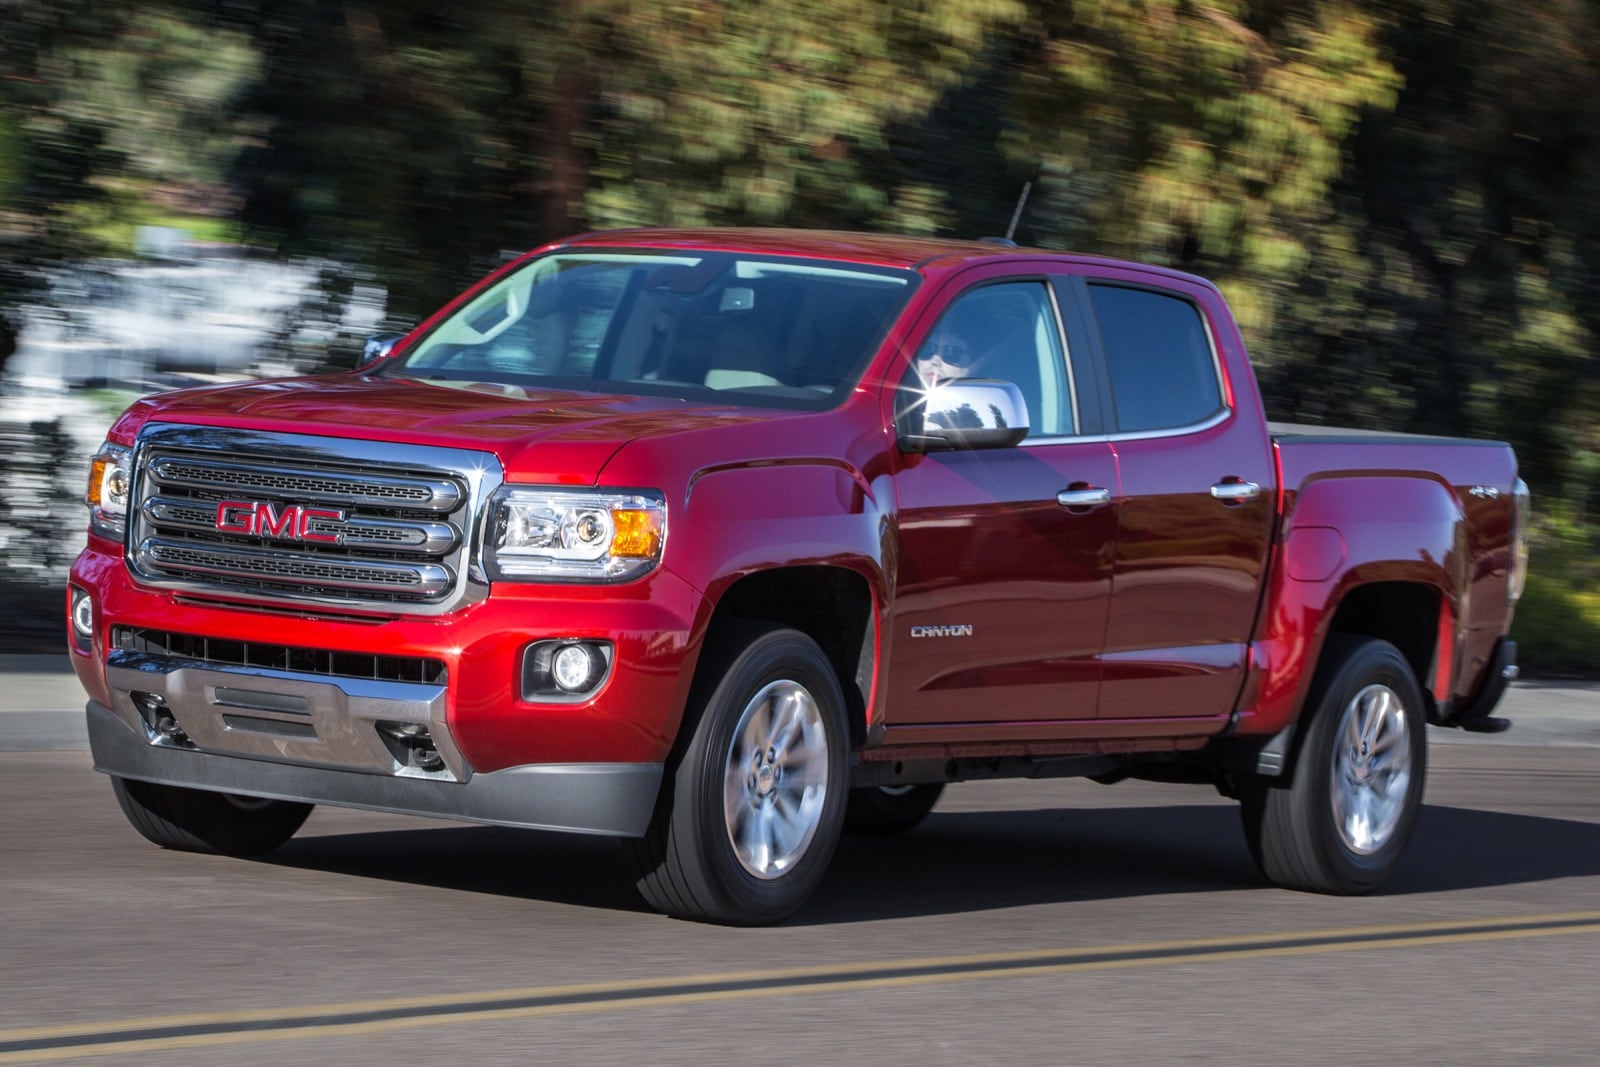 2015 GMC Canyon Review & Ratings | Edmunds